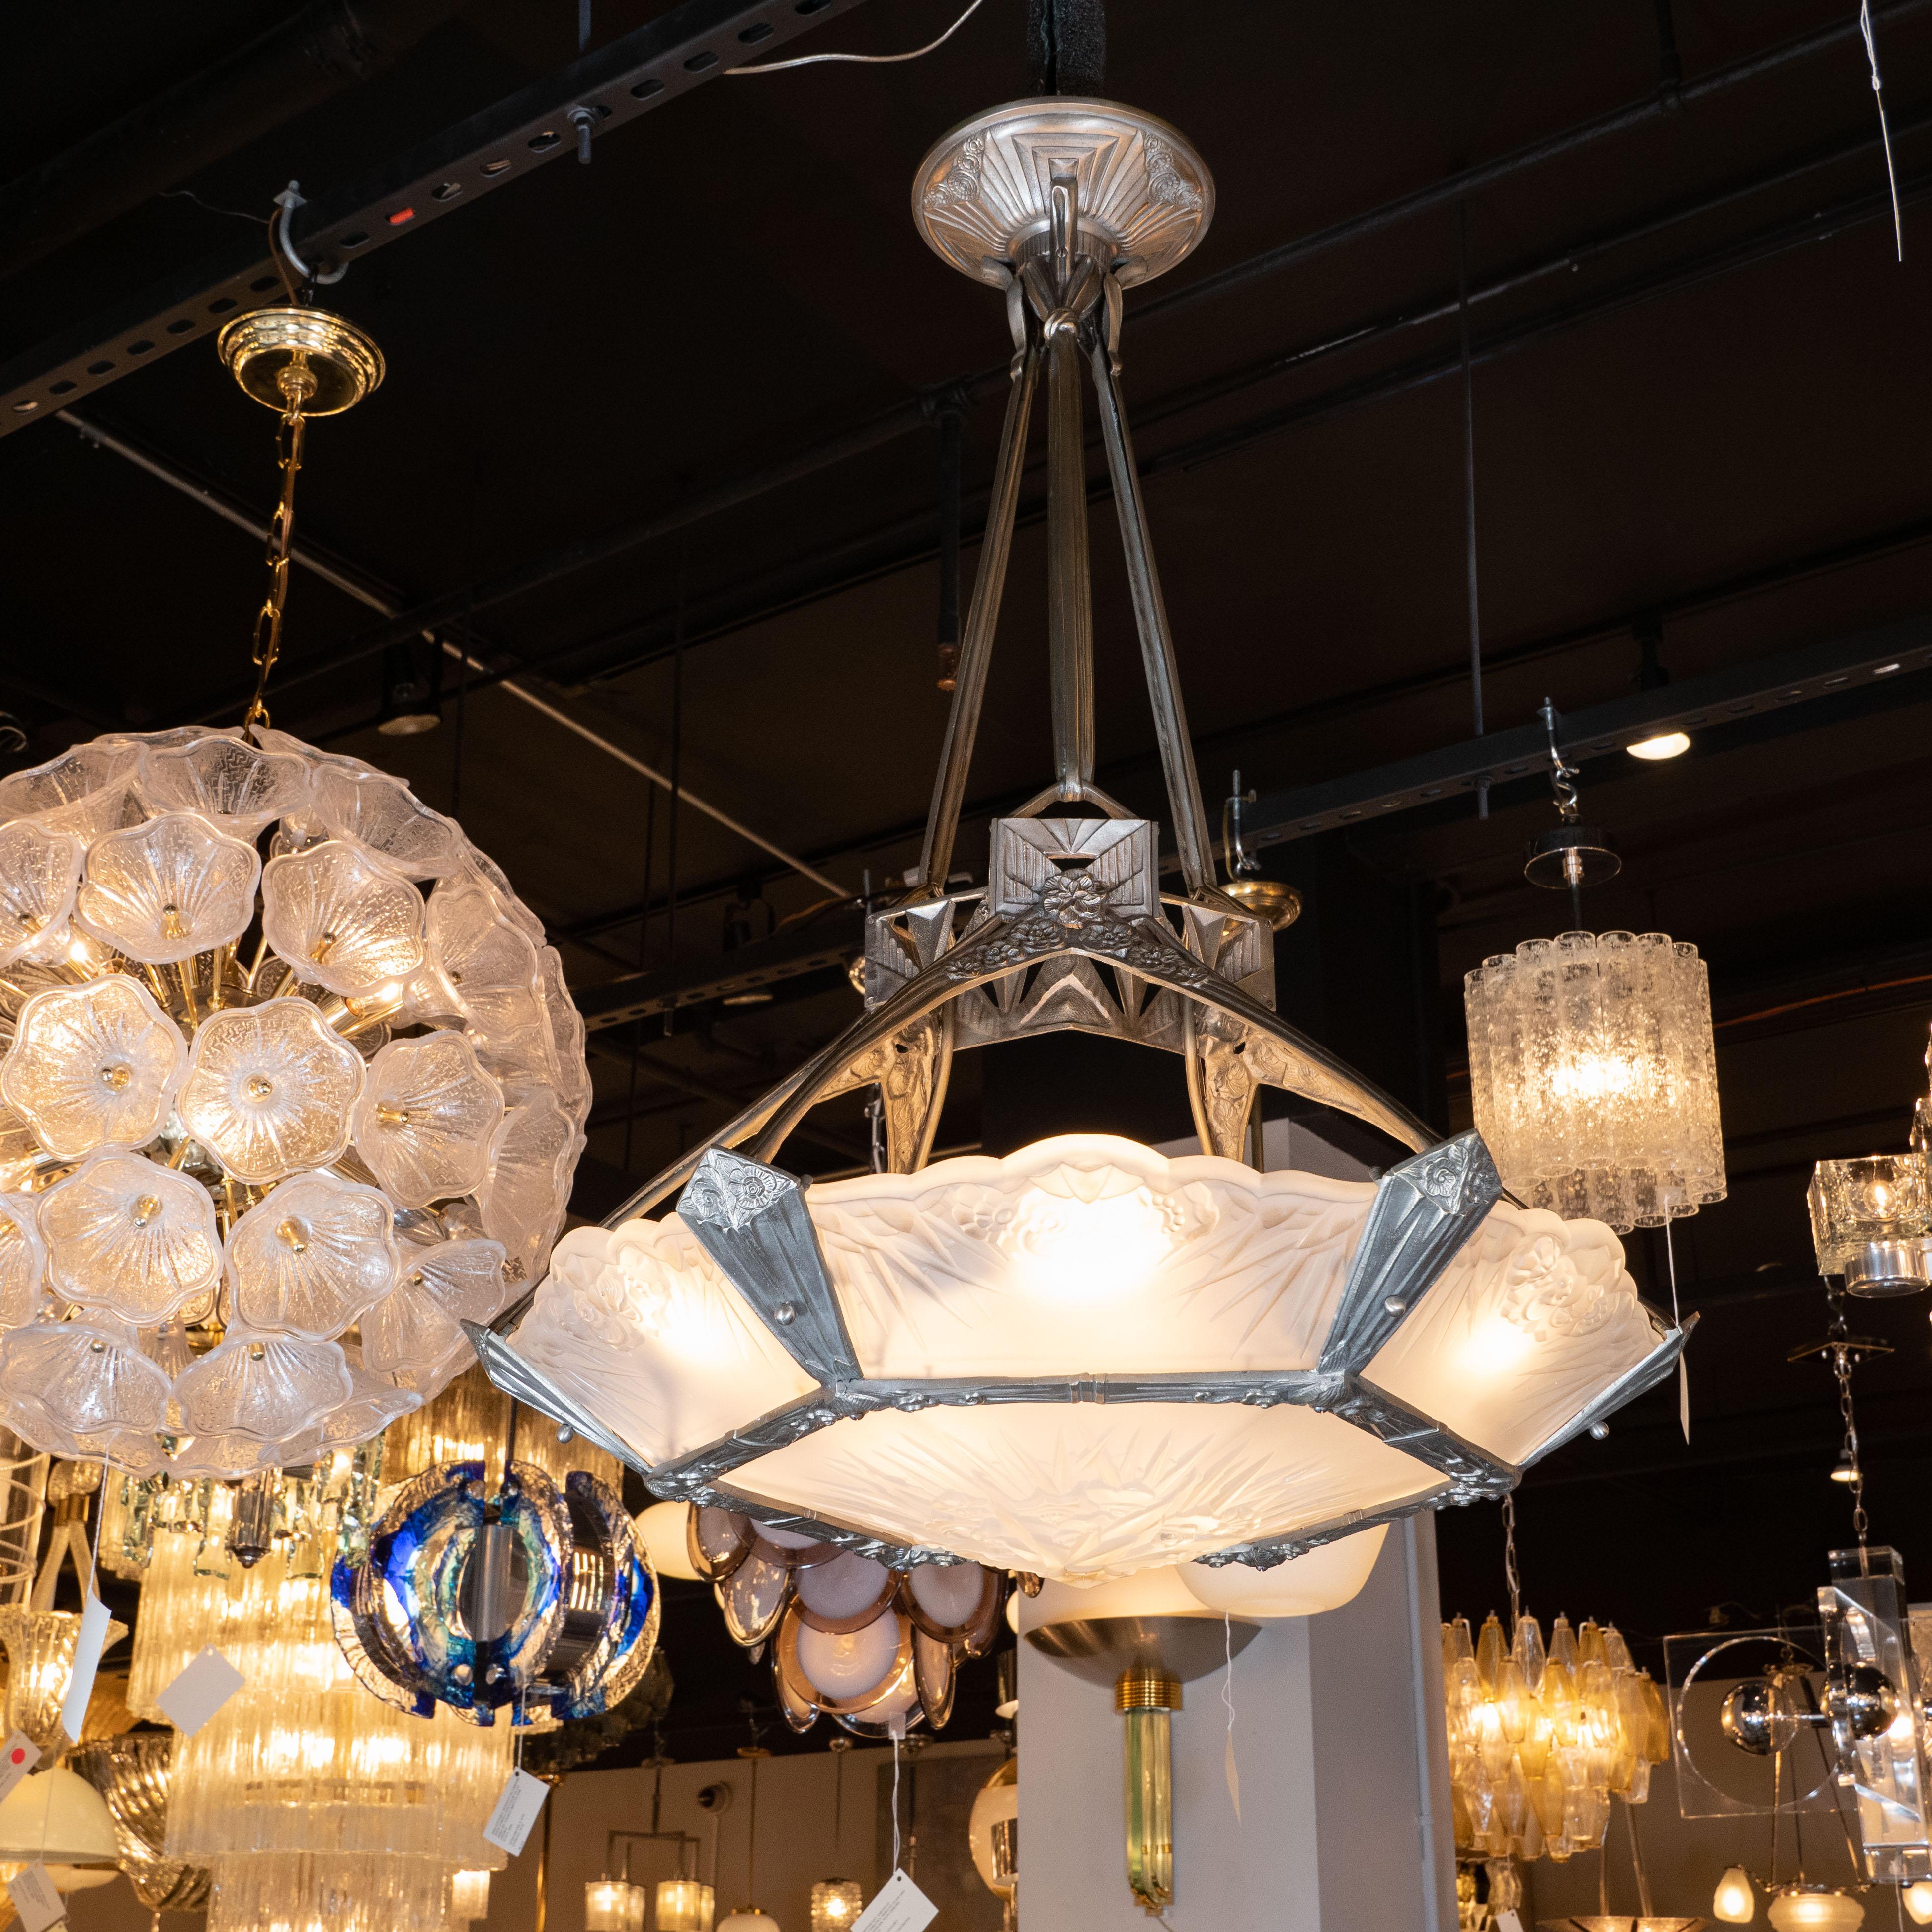 This elegant and sophisticated High style Art Deco Chandelier was realized in France, circa 1930. It features a hexagonal silvered bronze frame with stylized cubist geometric designs, including sunburst and cloud motifs. The frame supports six side